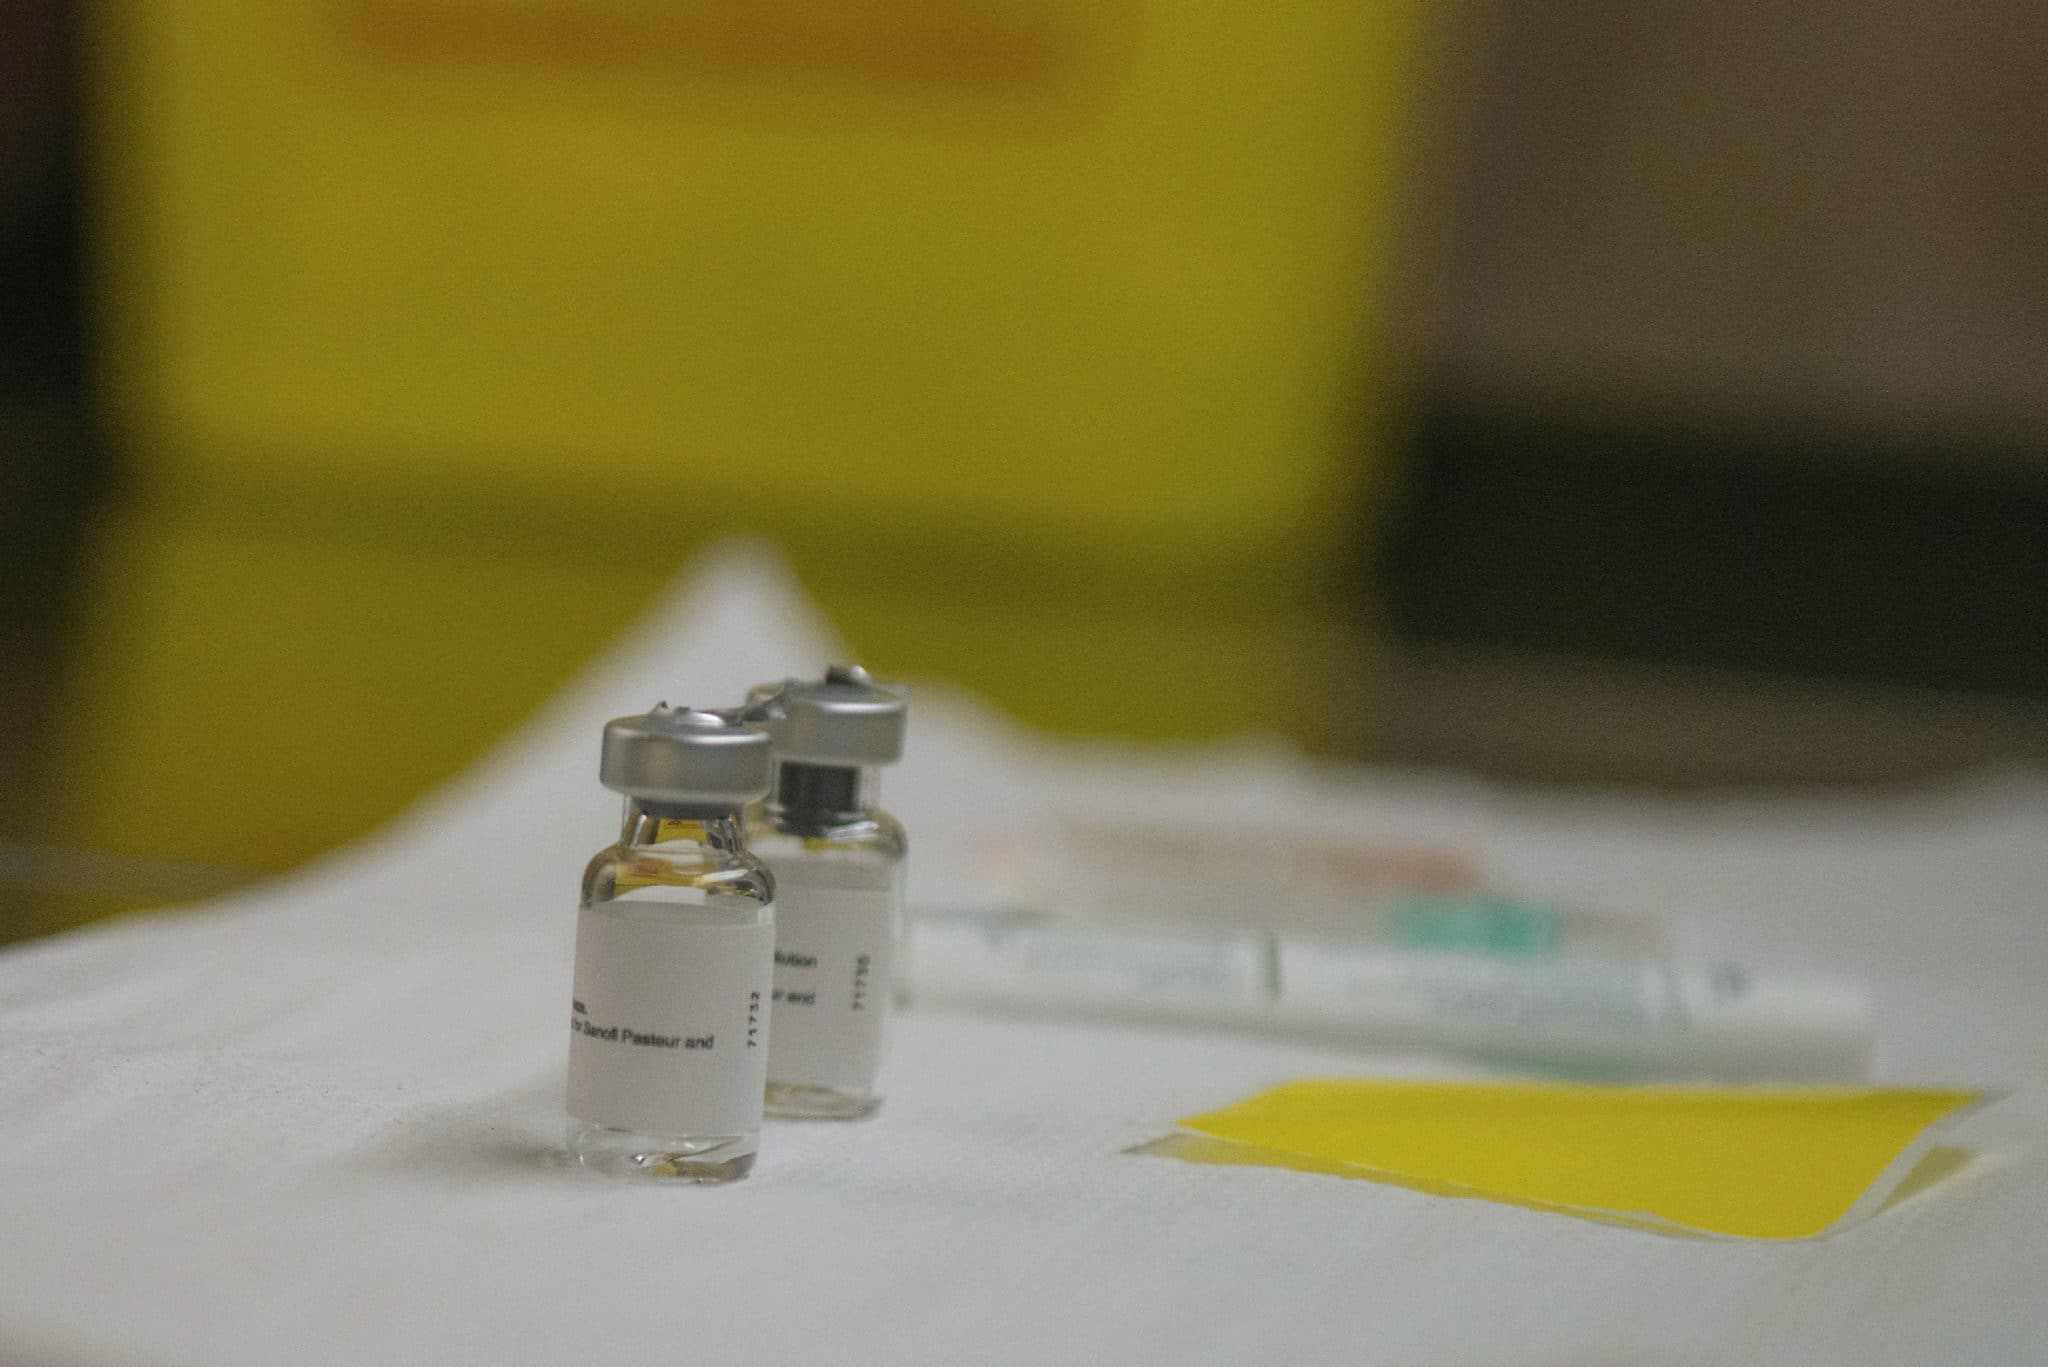 Previous attempts to create experimental vaccines for HIV have ended in failure 